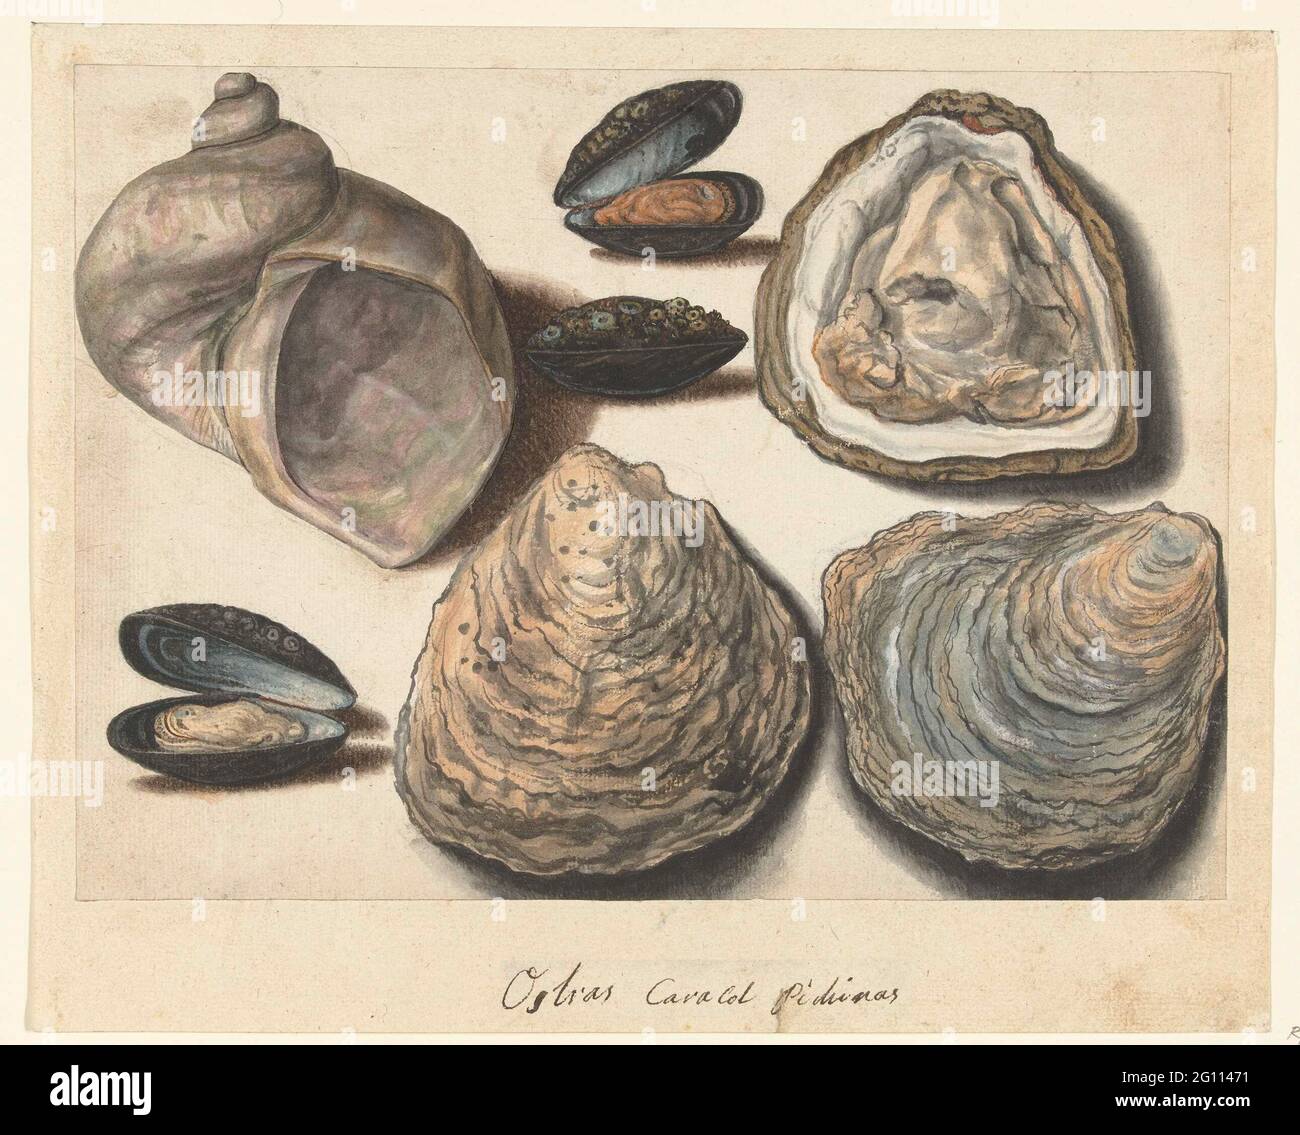 Oysters, mussels and lunar; Ostras Caracol Pichinas; Lombard album. Stock Photo